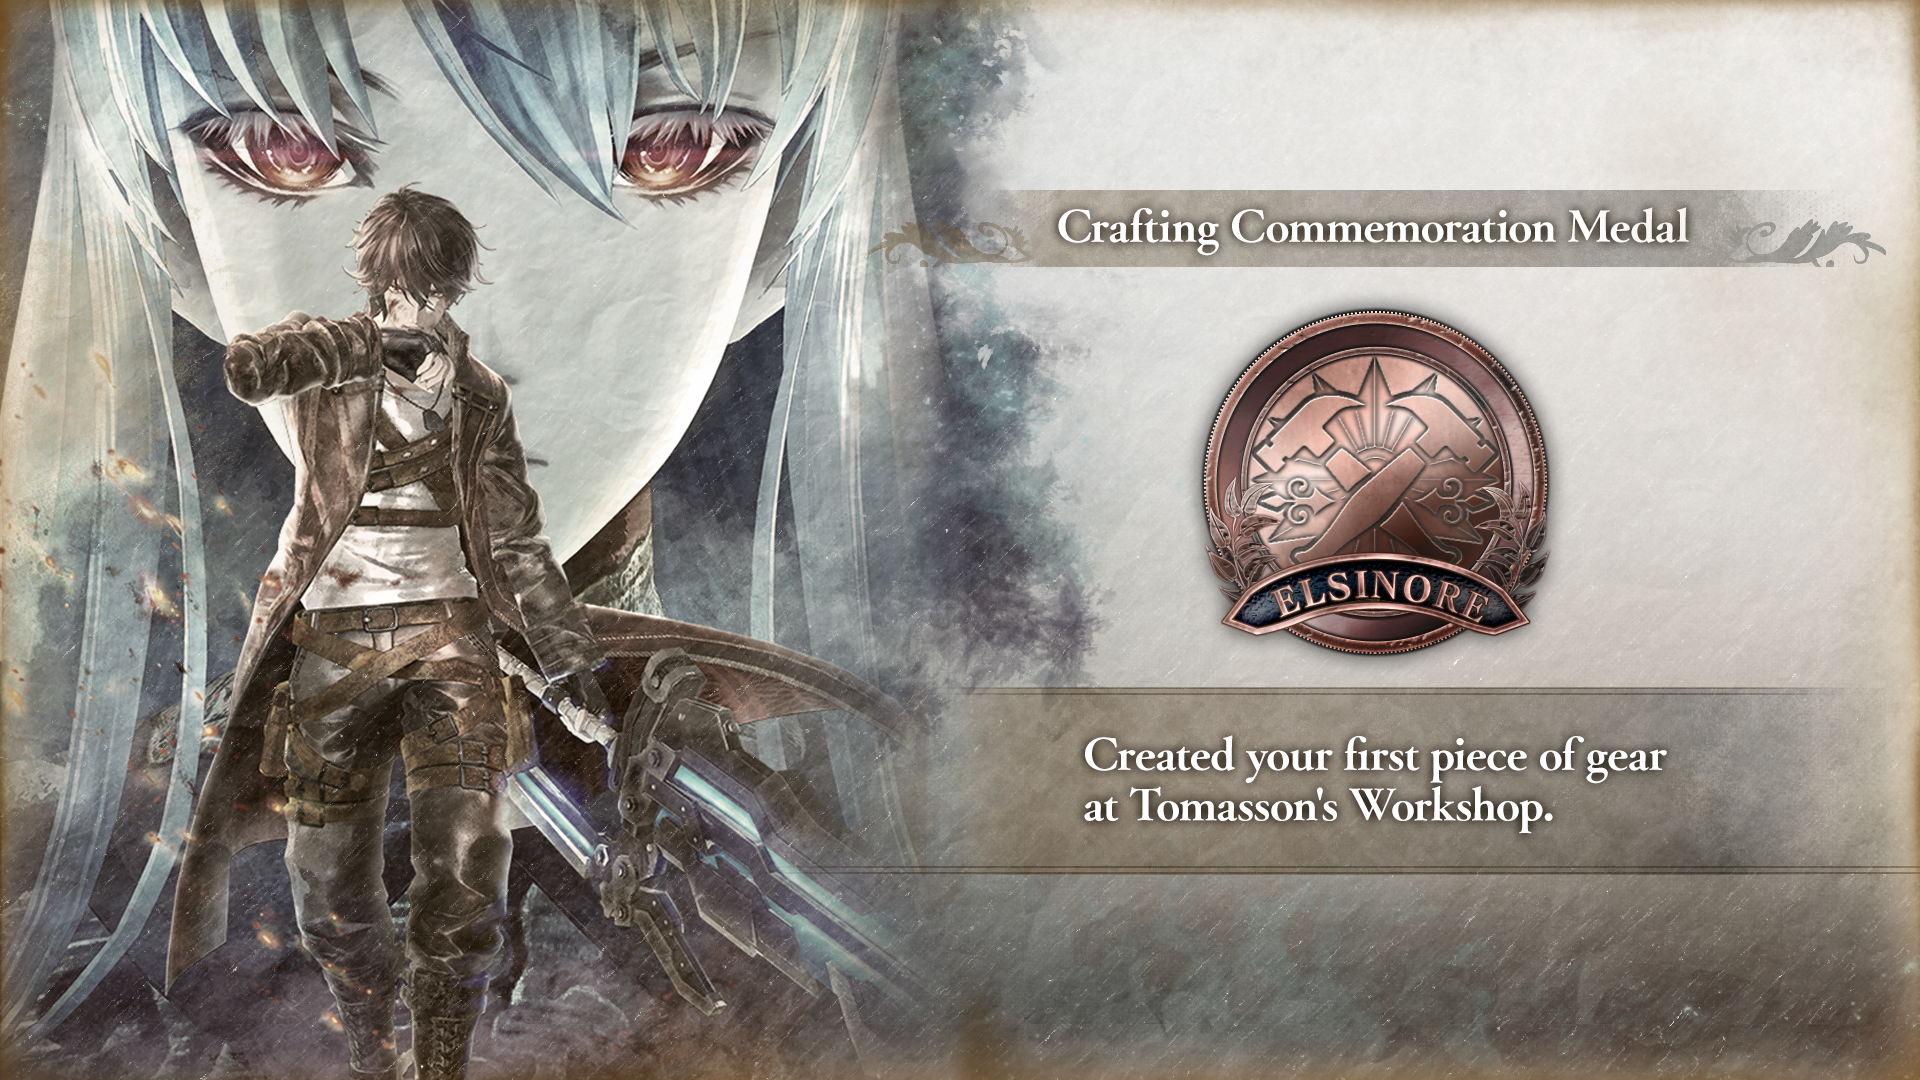 Crafting Commemoration Medal